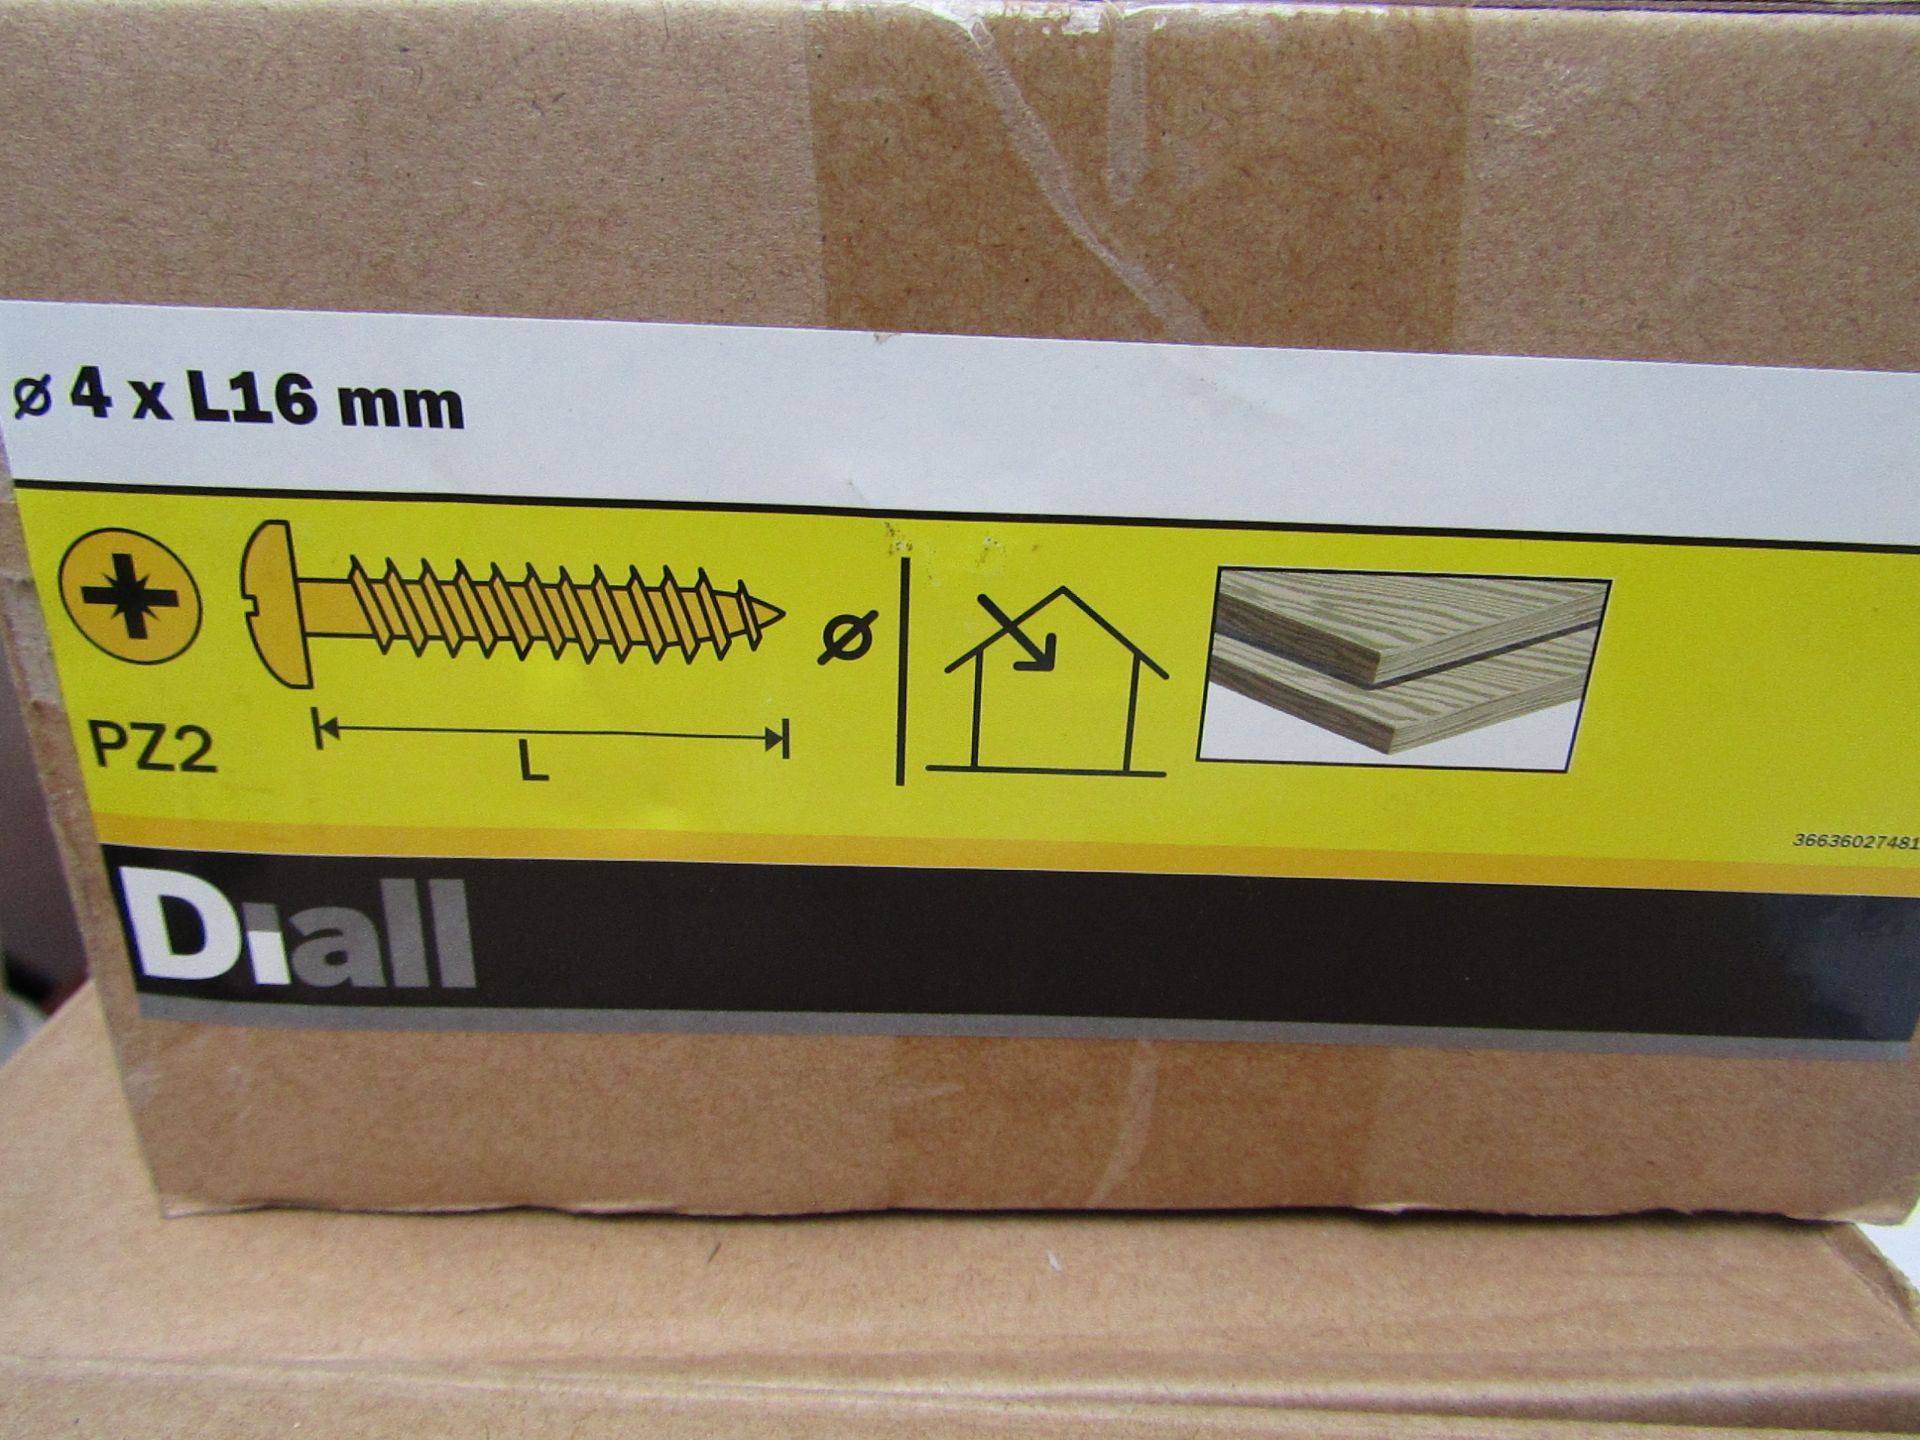 Diall - Wood Screws 4x16mm PZ2 - Quantity Unknown - Unused & Boxed.